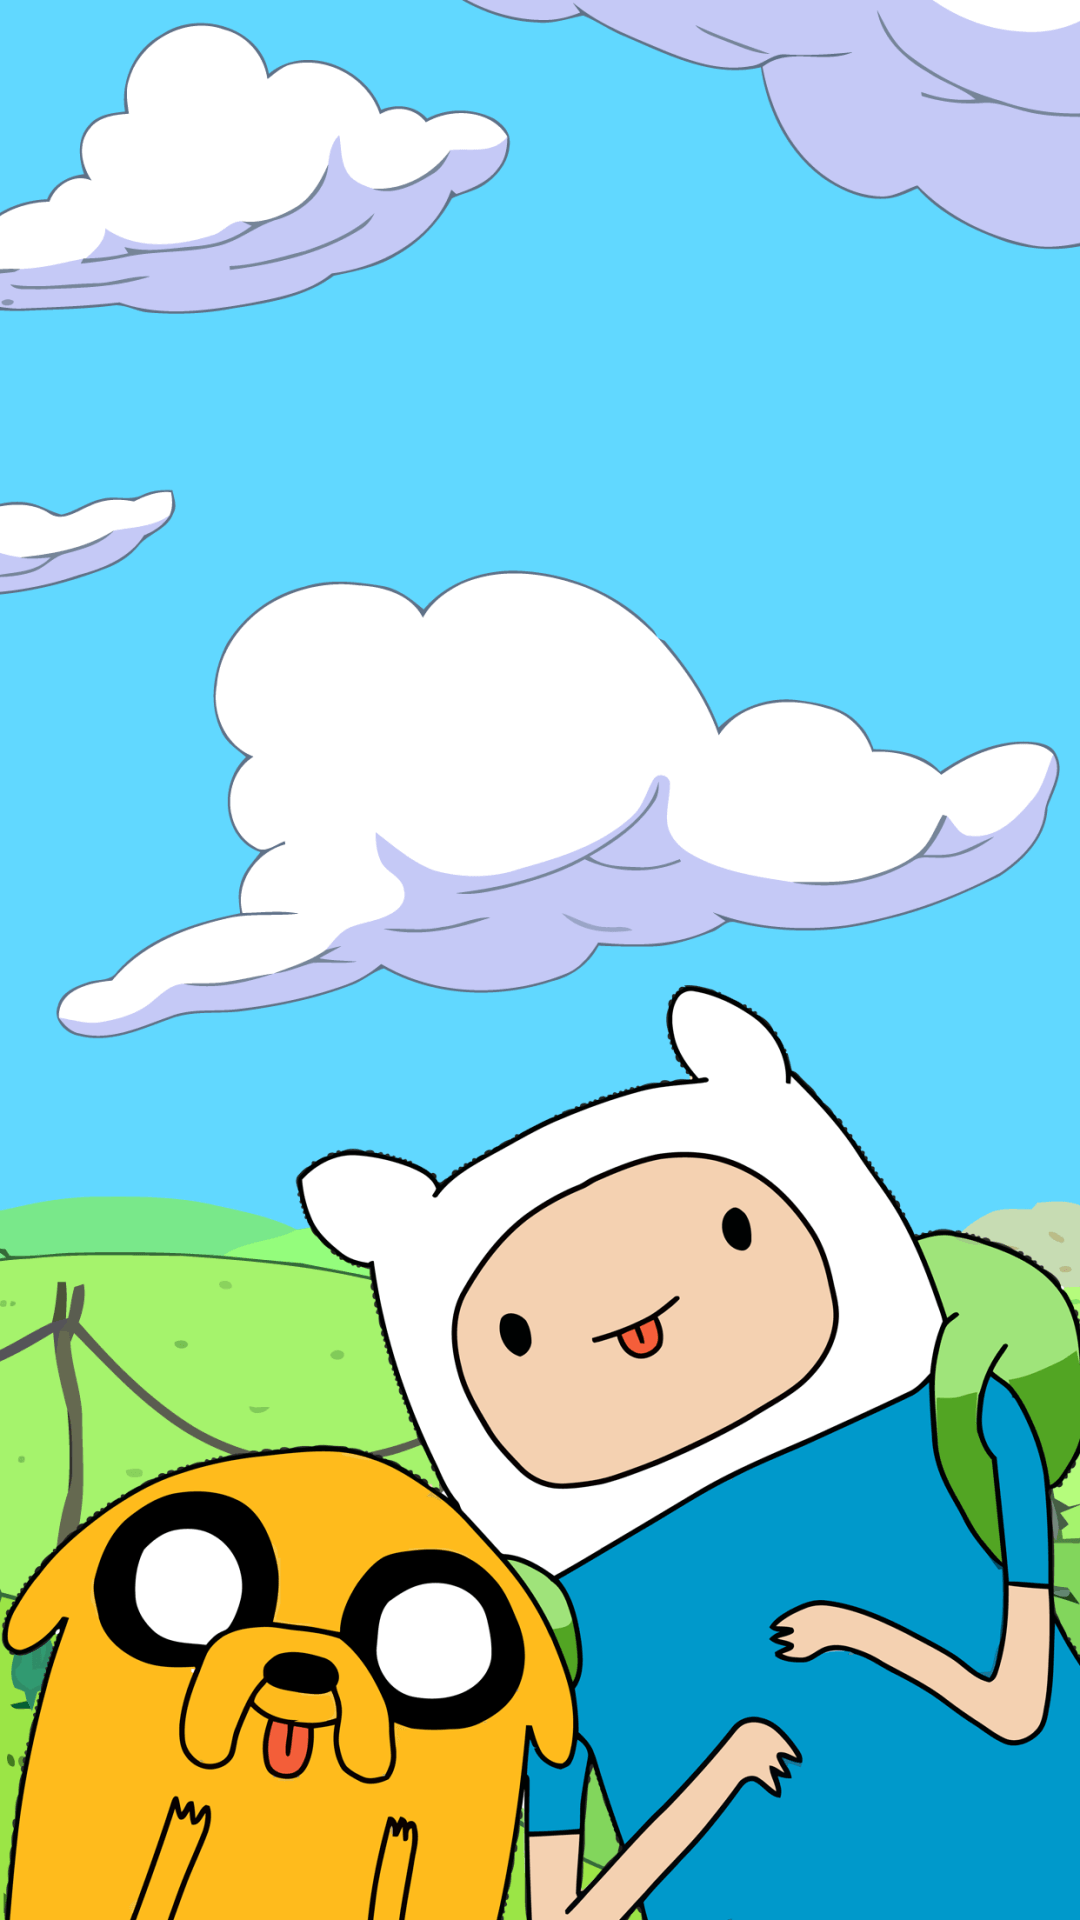 Adventure Time Aesthetic Wallpapers  Wallpaper Cave